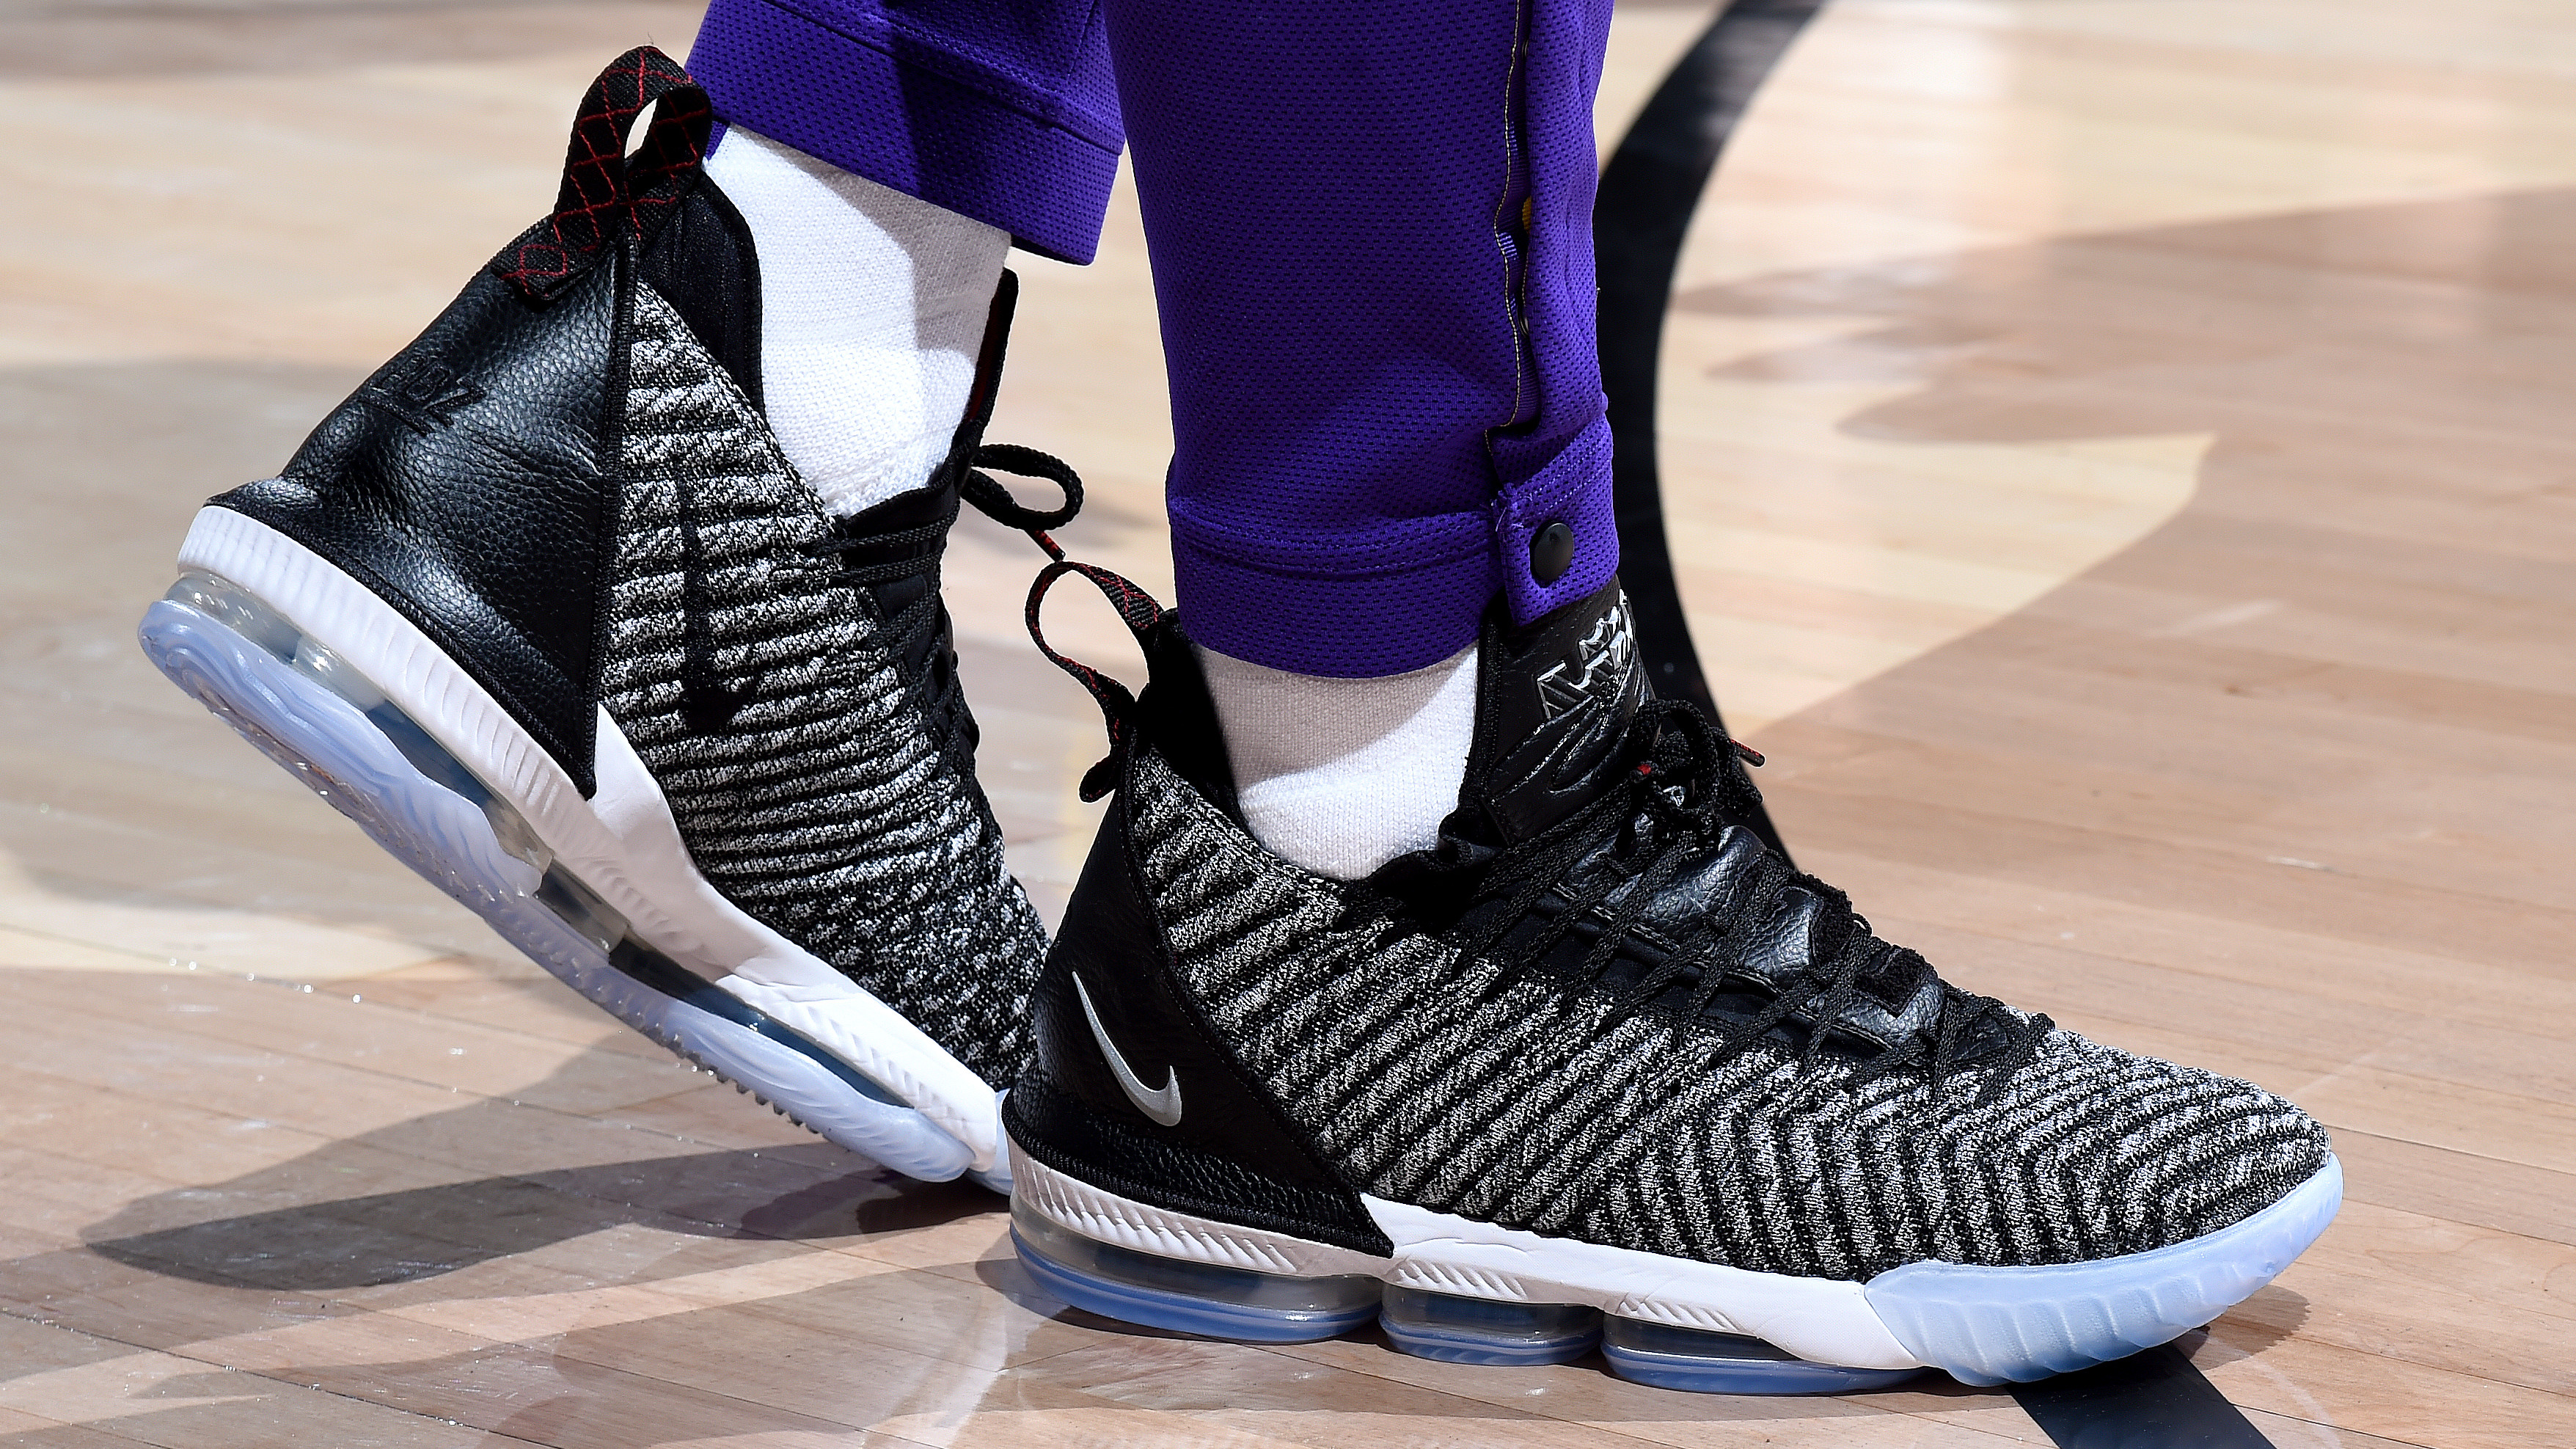 LeBron James Lakers Debut in the 'Oreo' LeBron 16 | Complex